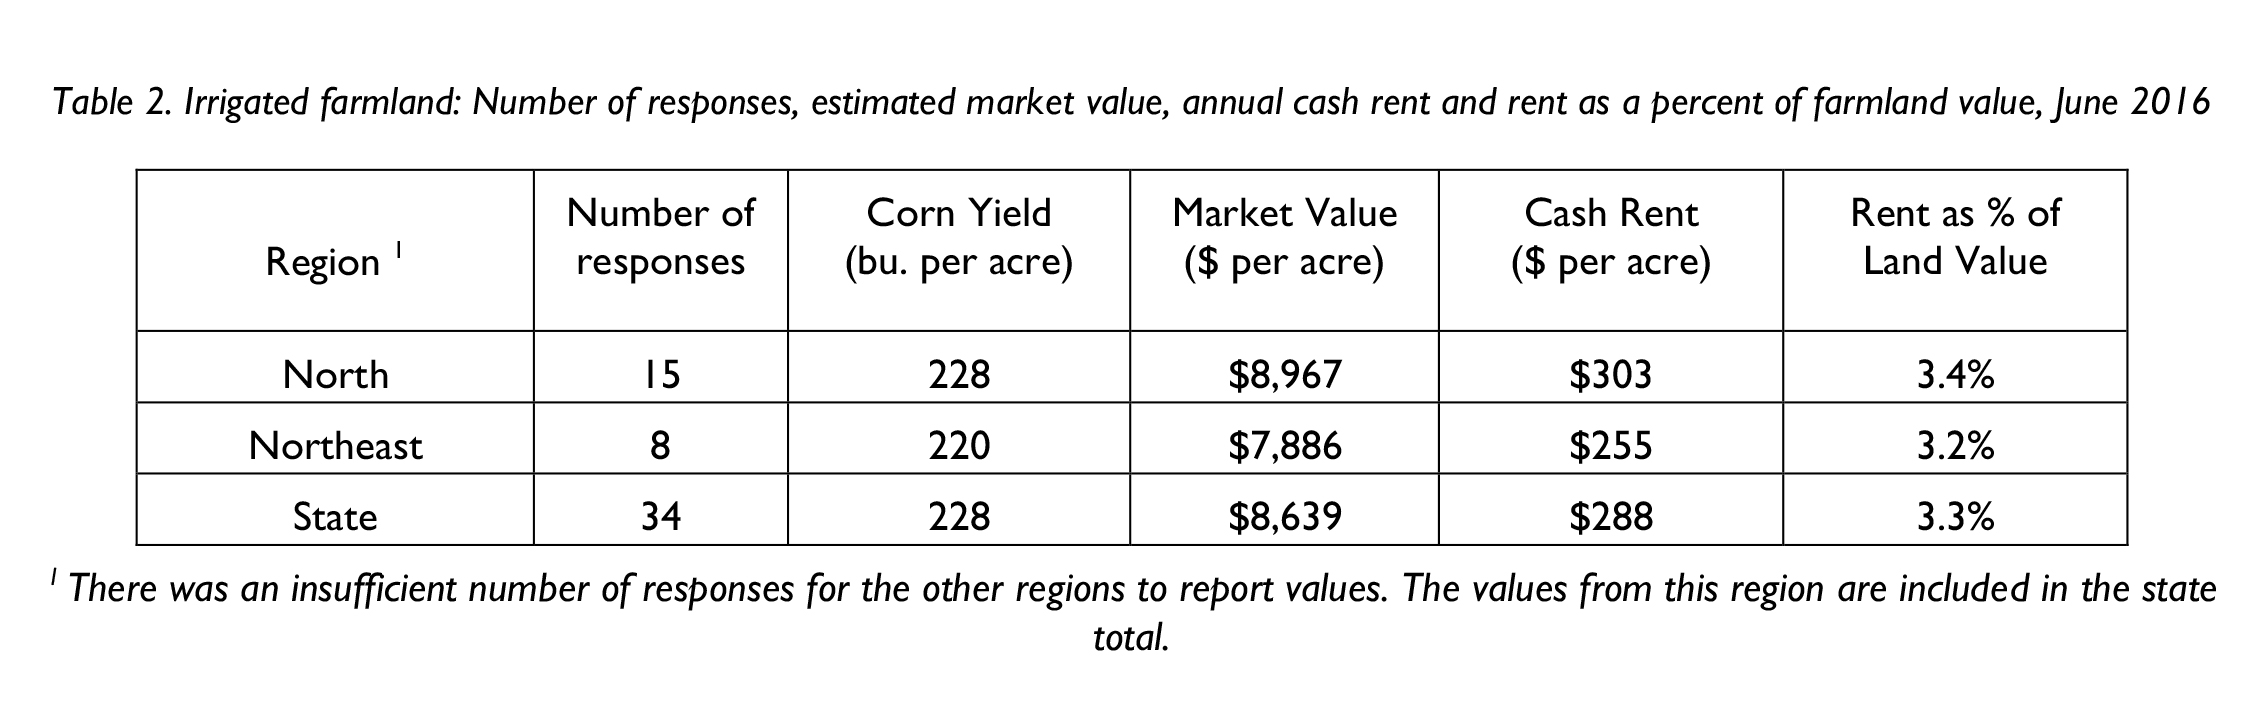 Table 2. Irrigated farmland: Number of responses, estimated market value, annual cash rent and rent as a percent of farmland value, June 2016